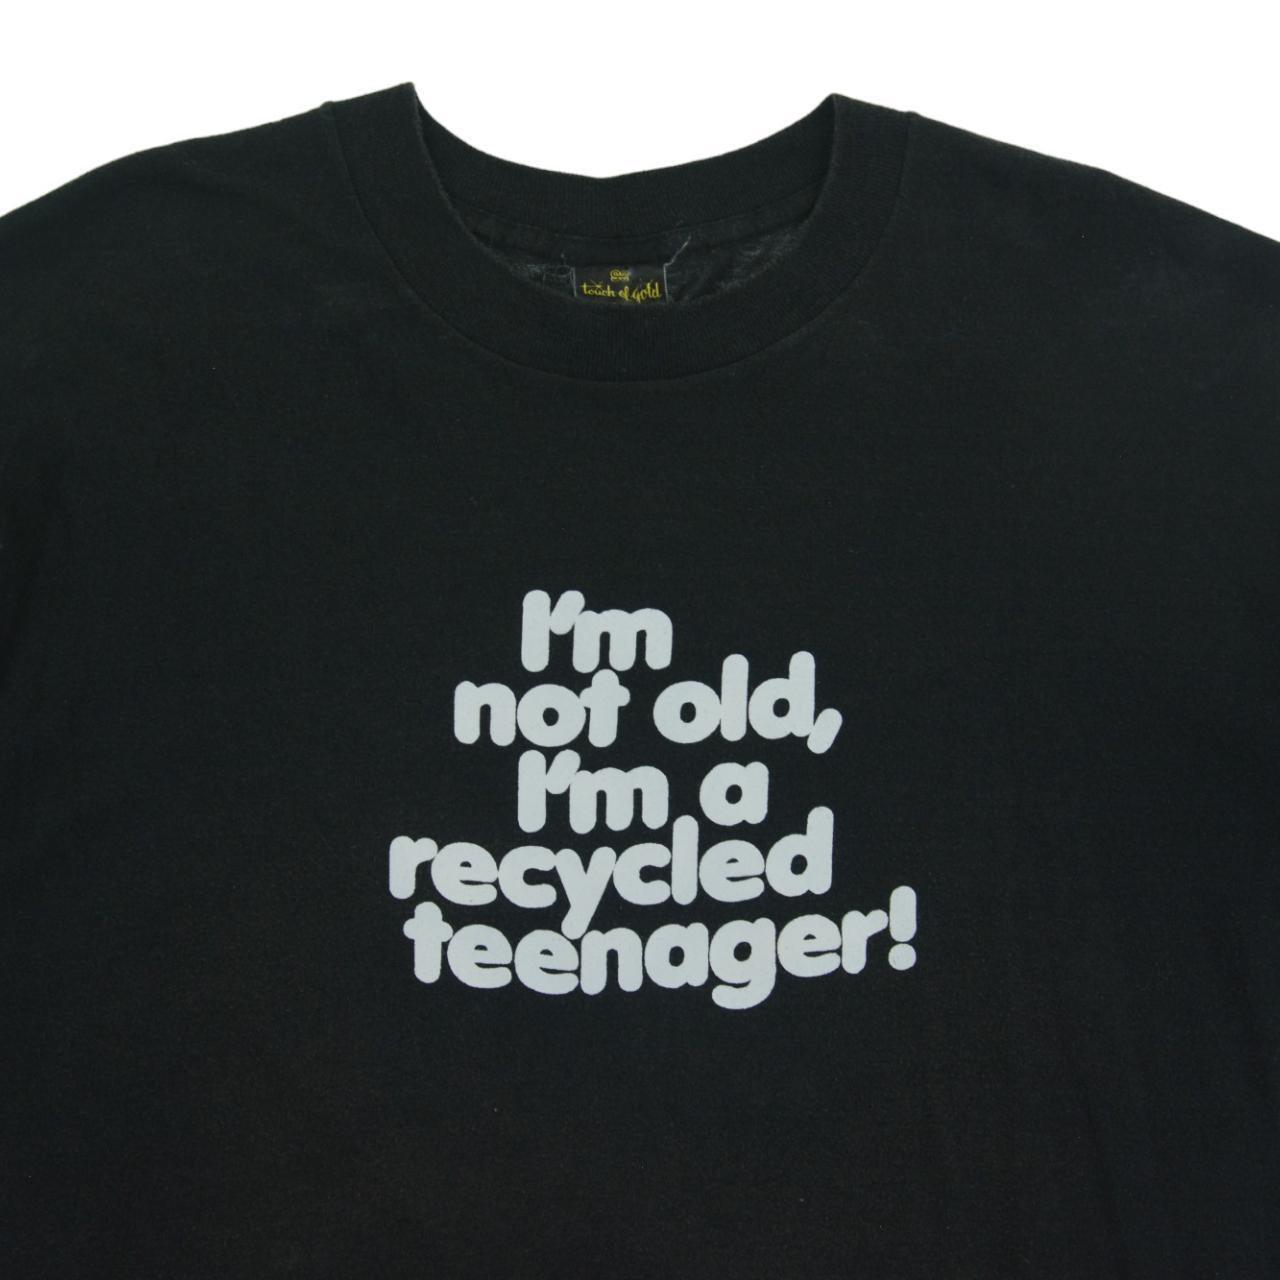 Vintage Teenager T Shirt Size L - Known Source